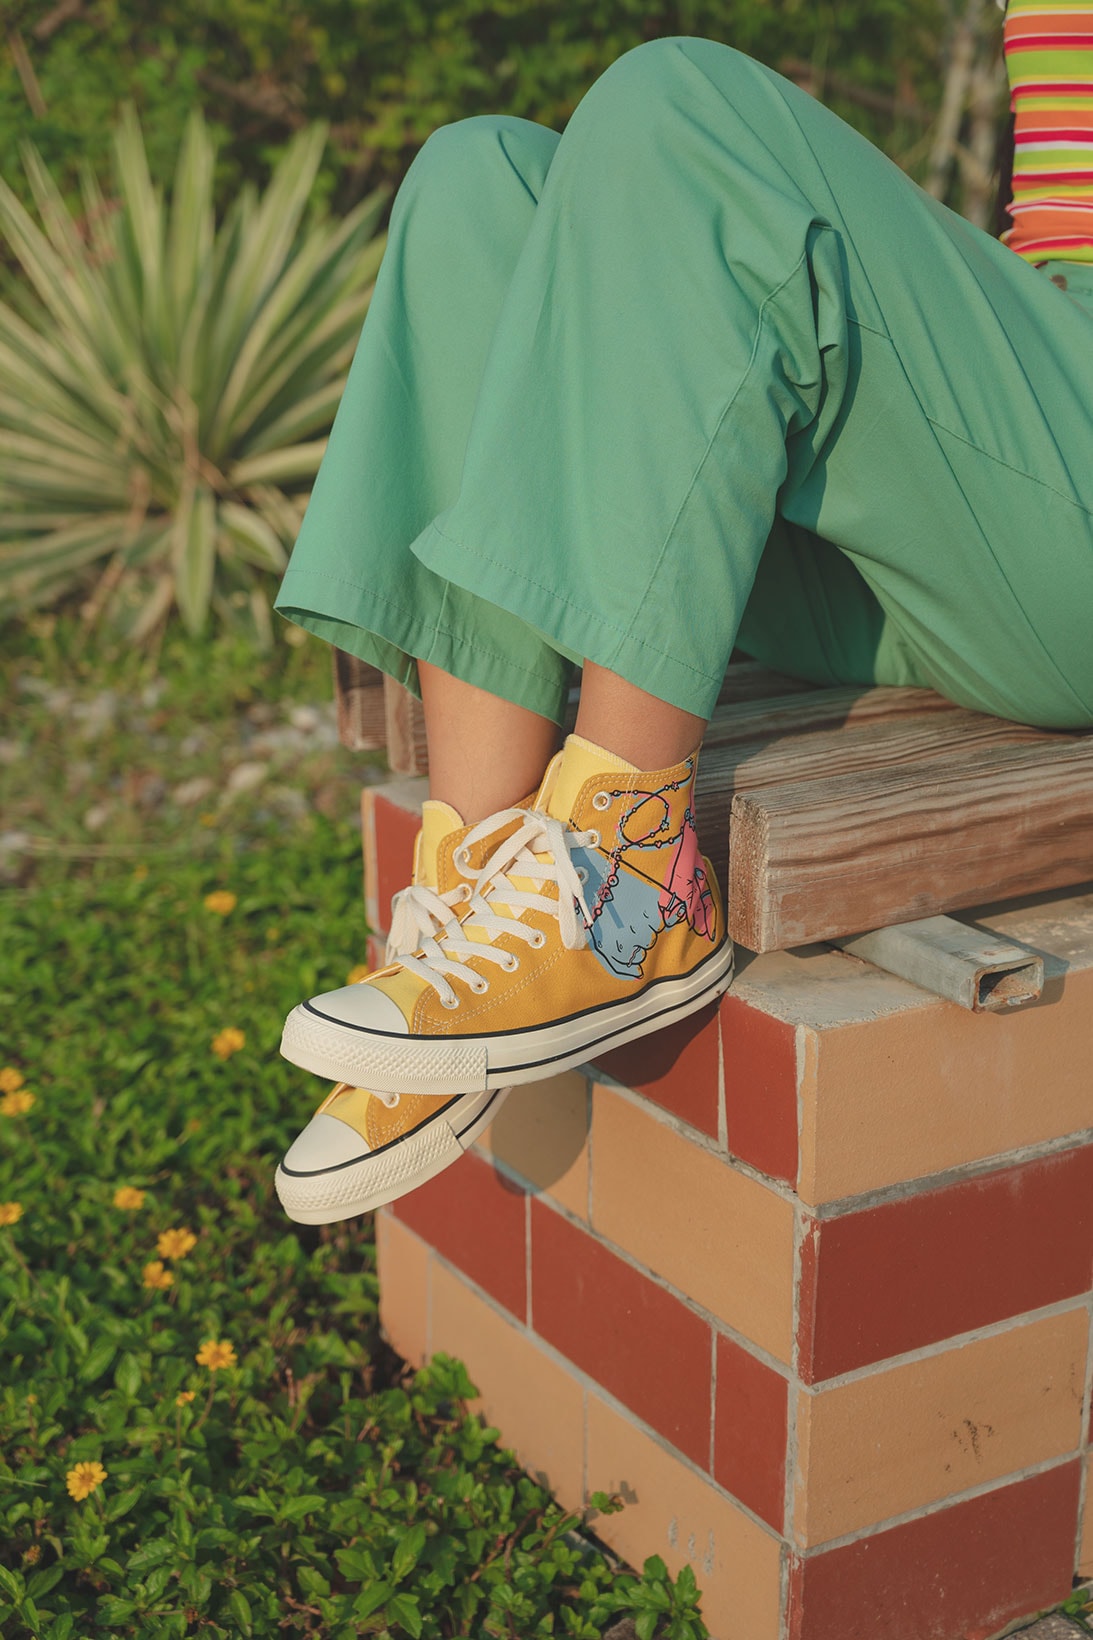 converse by you millie bobby brown pauline wattanodom artist chuck taylor all star high top platform sneakers collaboration orange green pants